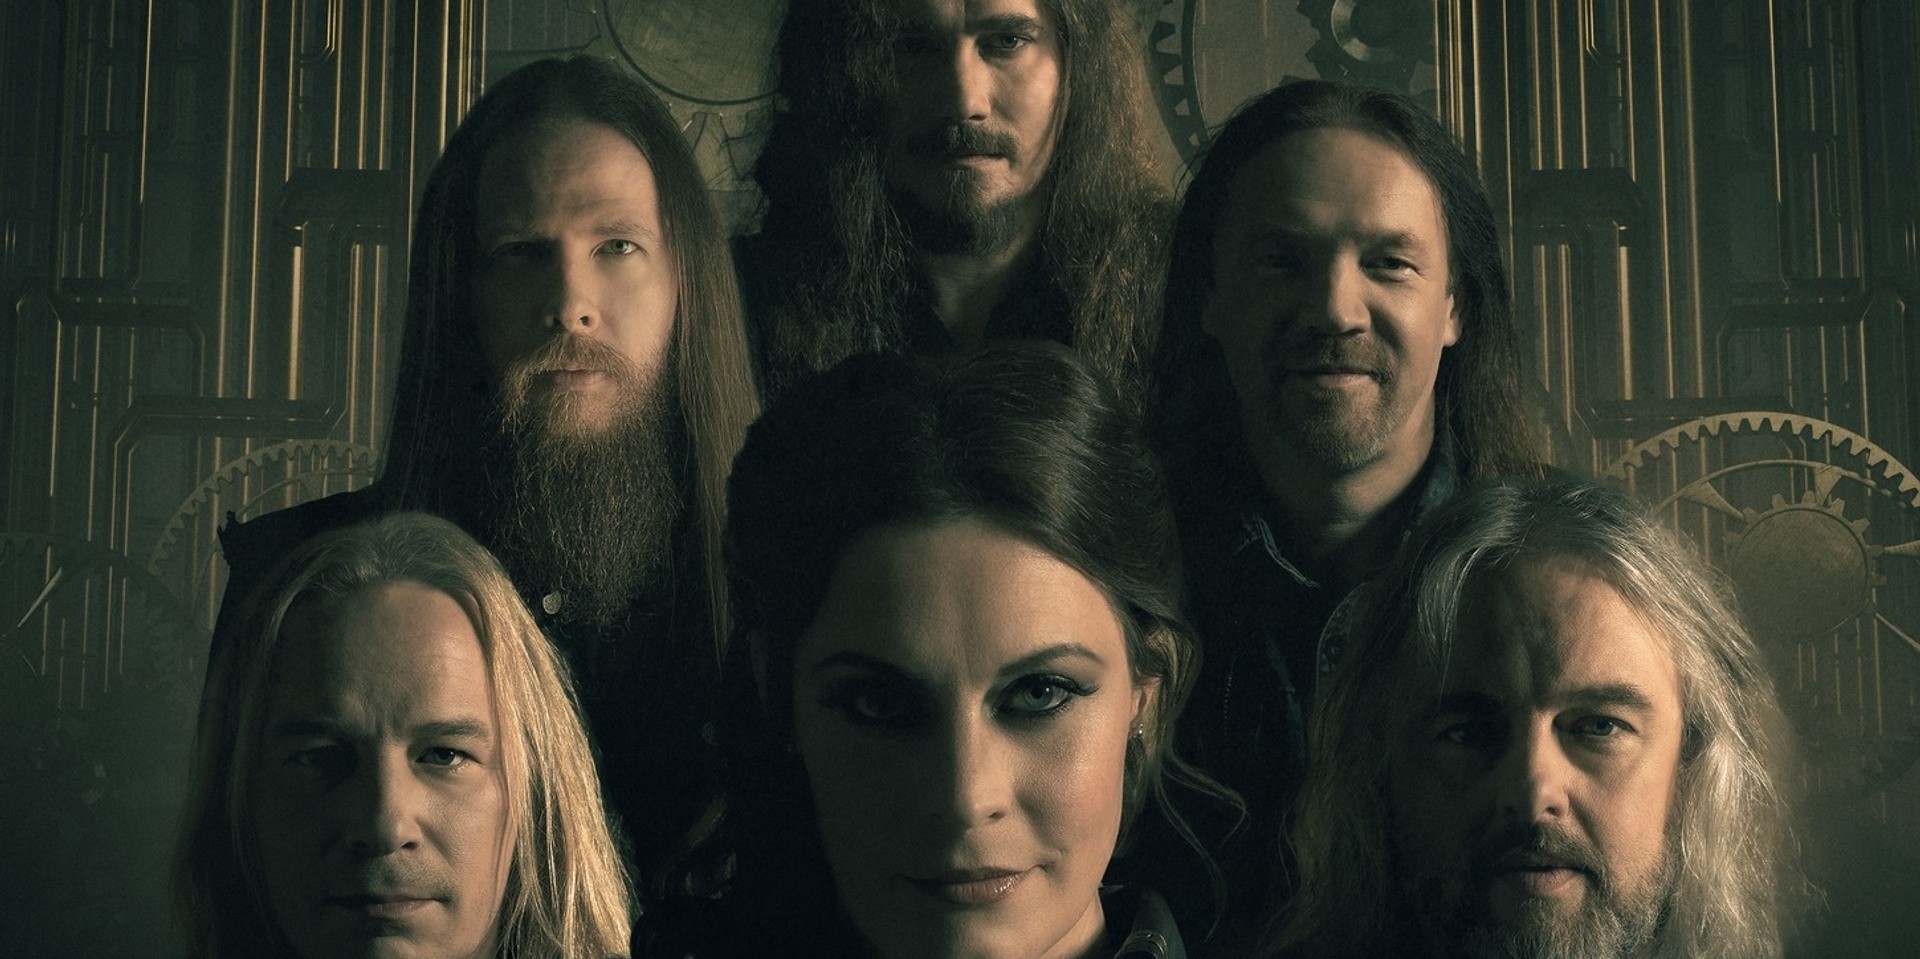 Nightwish postpone Asia tour to 2023 with stops in China, Singapore, Indonesia, and Taiwan